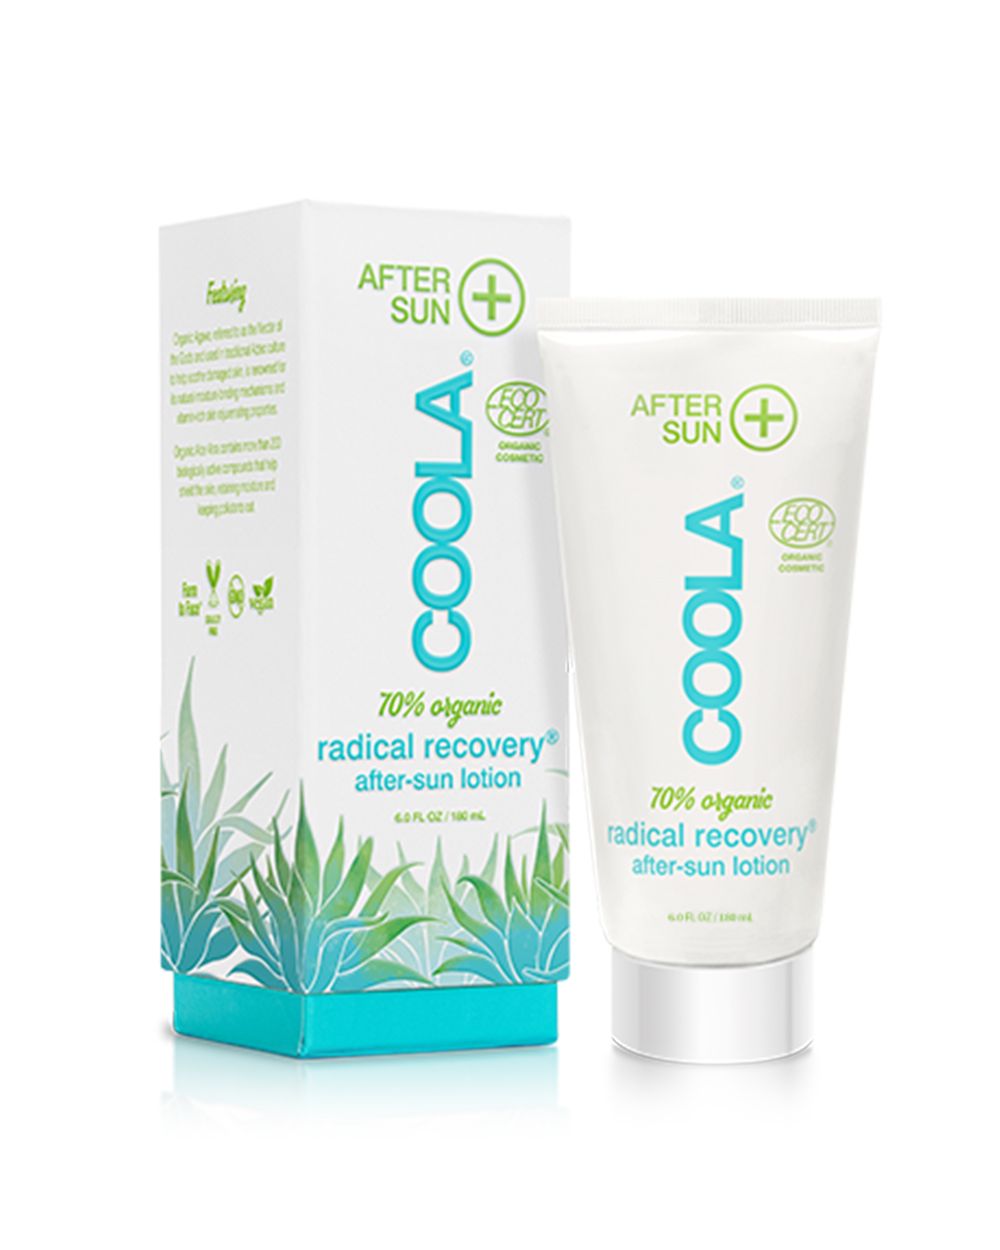 Ecocert Radical Recovery Organic After-Sun Lotion, $55 from Coola